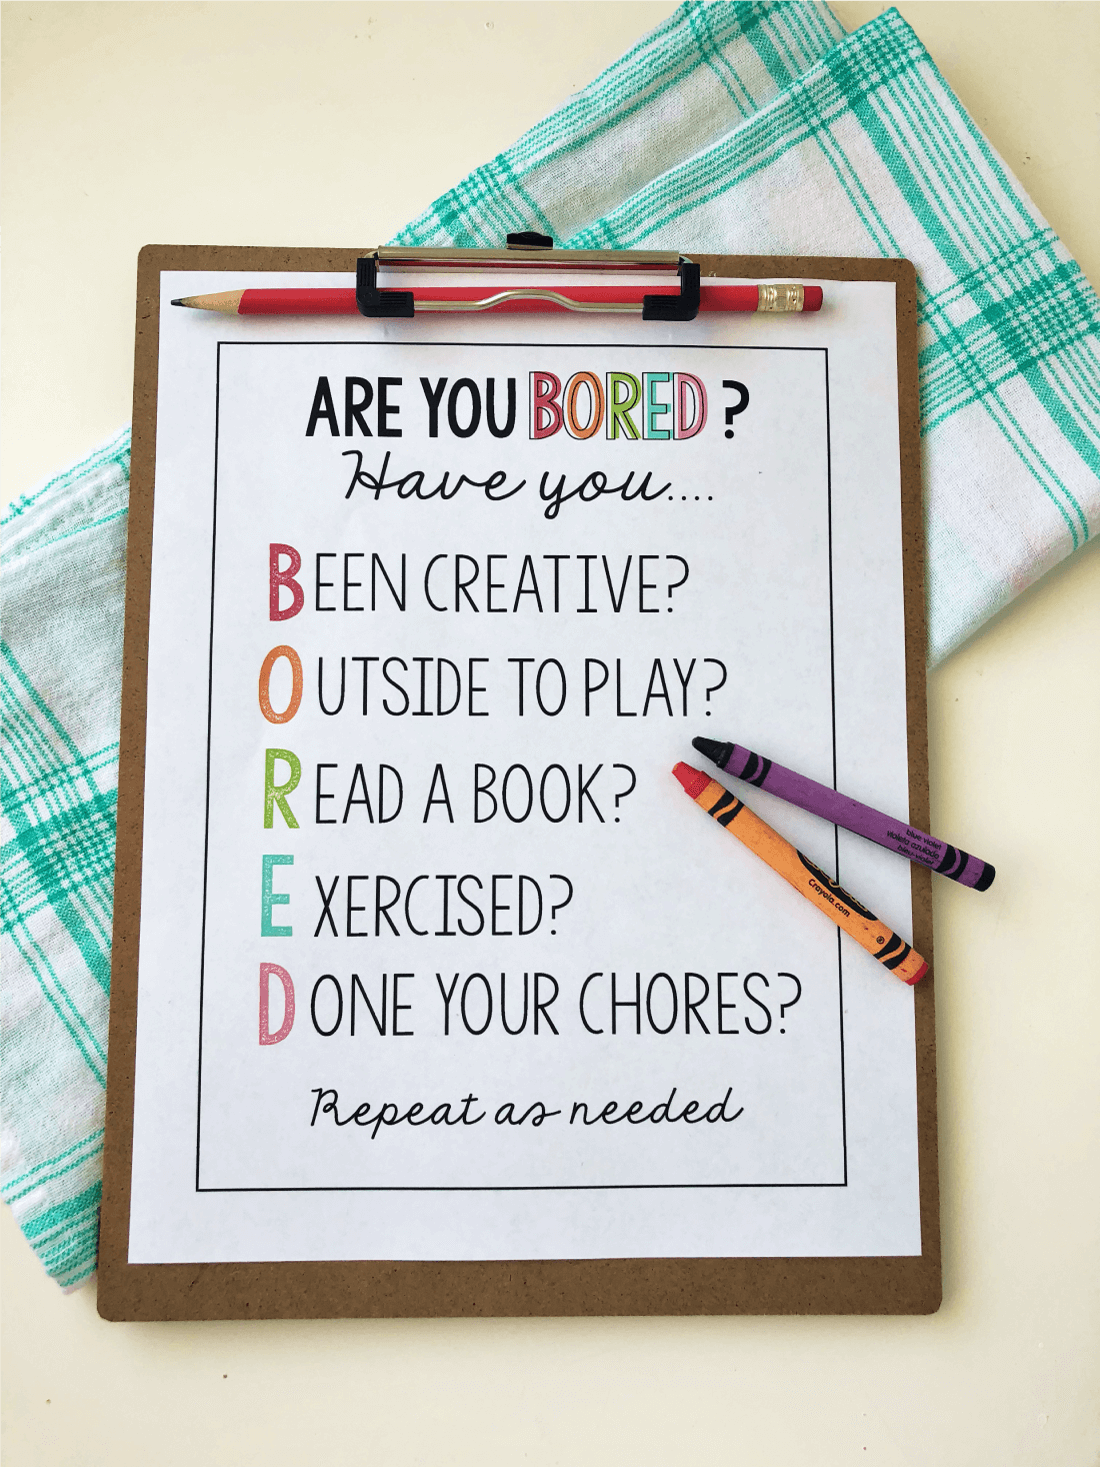 Things to Do When Bored- print out this sheet to use with your kids. www.thirtyhandmadedays.com